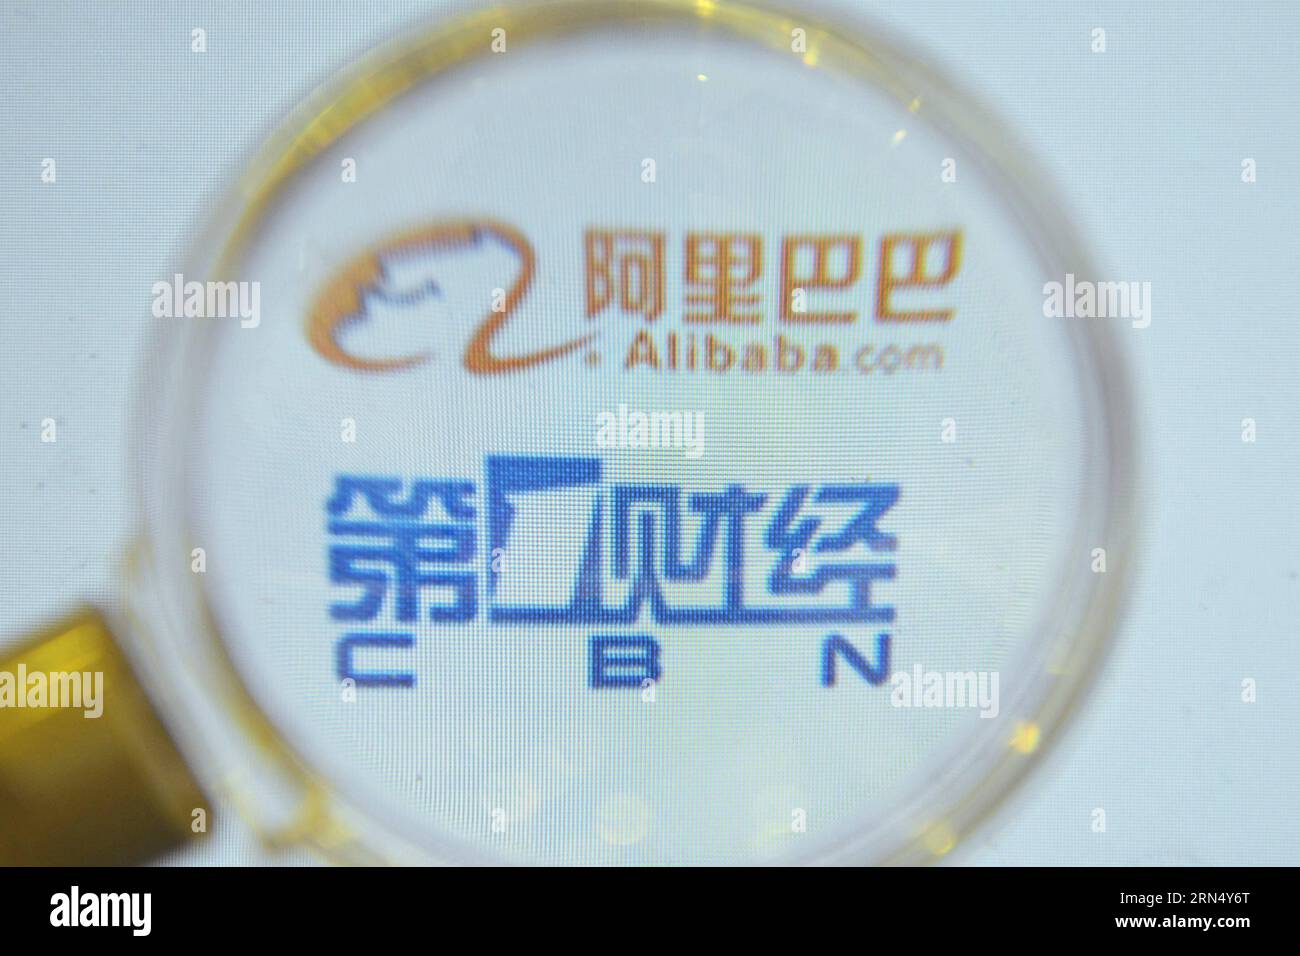 (150604) -- HANGZHOU, June 4, 2015 -- Photo taken on June 4, 2015 shows the logos of Alibaba Group and China Business Network (CBN). Alibaba, China s online e-commerce company, together with Shanghai Media Group (SMG), announced Thursday that Alibaba would invest 1.2 billion yuan (about 193.56 million U.S. dollars) to CBN for participation. CBN is attached to the SMG. ) (mp) CHINA-HANGZHOU-ALIBABA GROUP-CBN-INVESTMENT (CN) LongxWei PUBLICATIONxNOTxINxCHN   Hangzhou June 4 2015 Photo Taken ON June 4 2015 Shows The Logo of Alibaba Group and China Business Network CBN Alibaba China S Online e Com Stock Photo